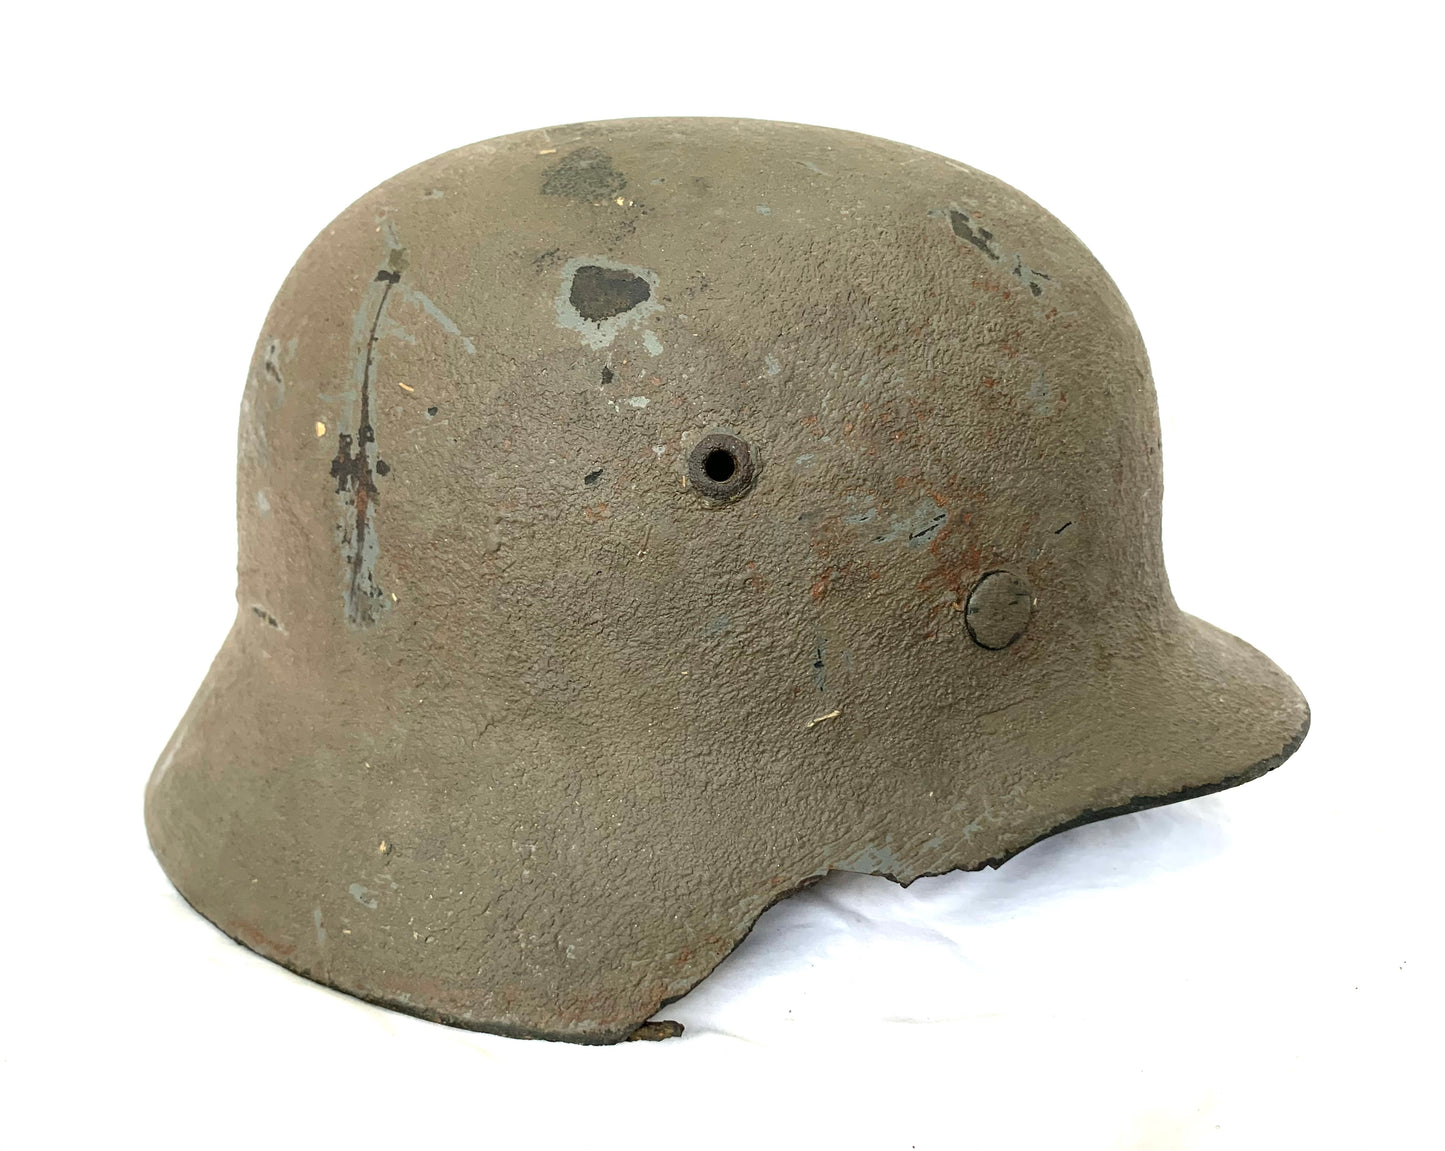 WW2 German M40 Single Decal Battle Recovered Helmet with Liner, recovered from the Eastern Front